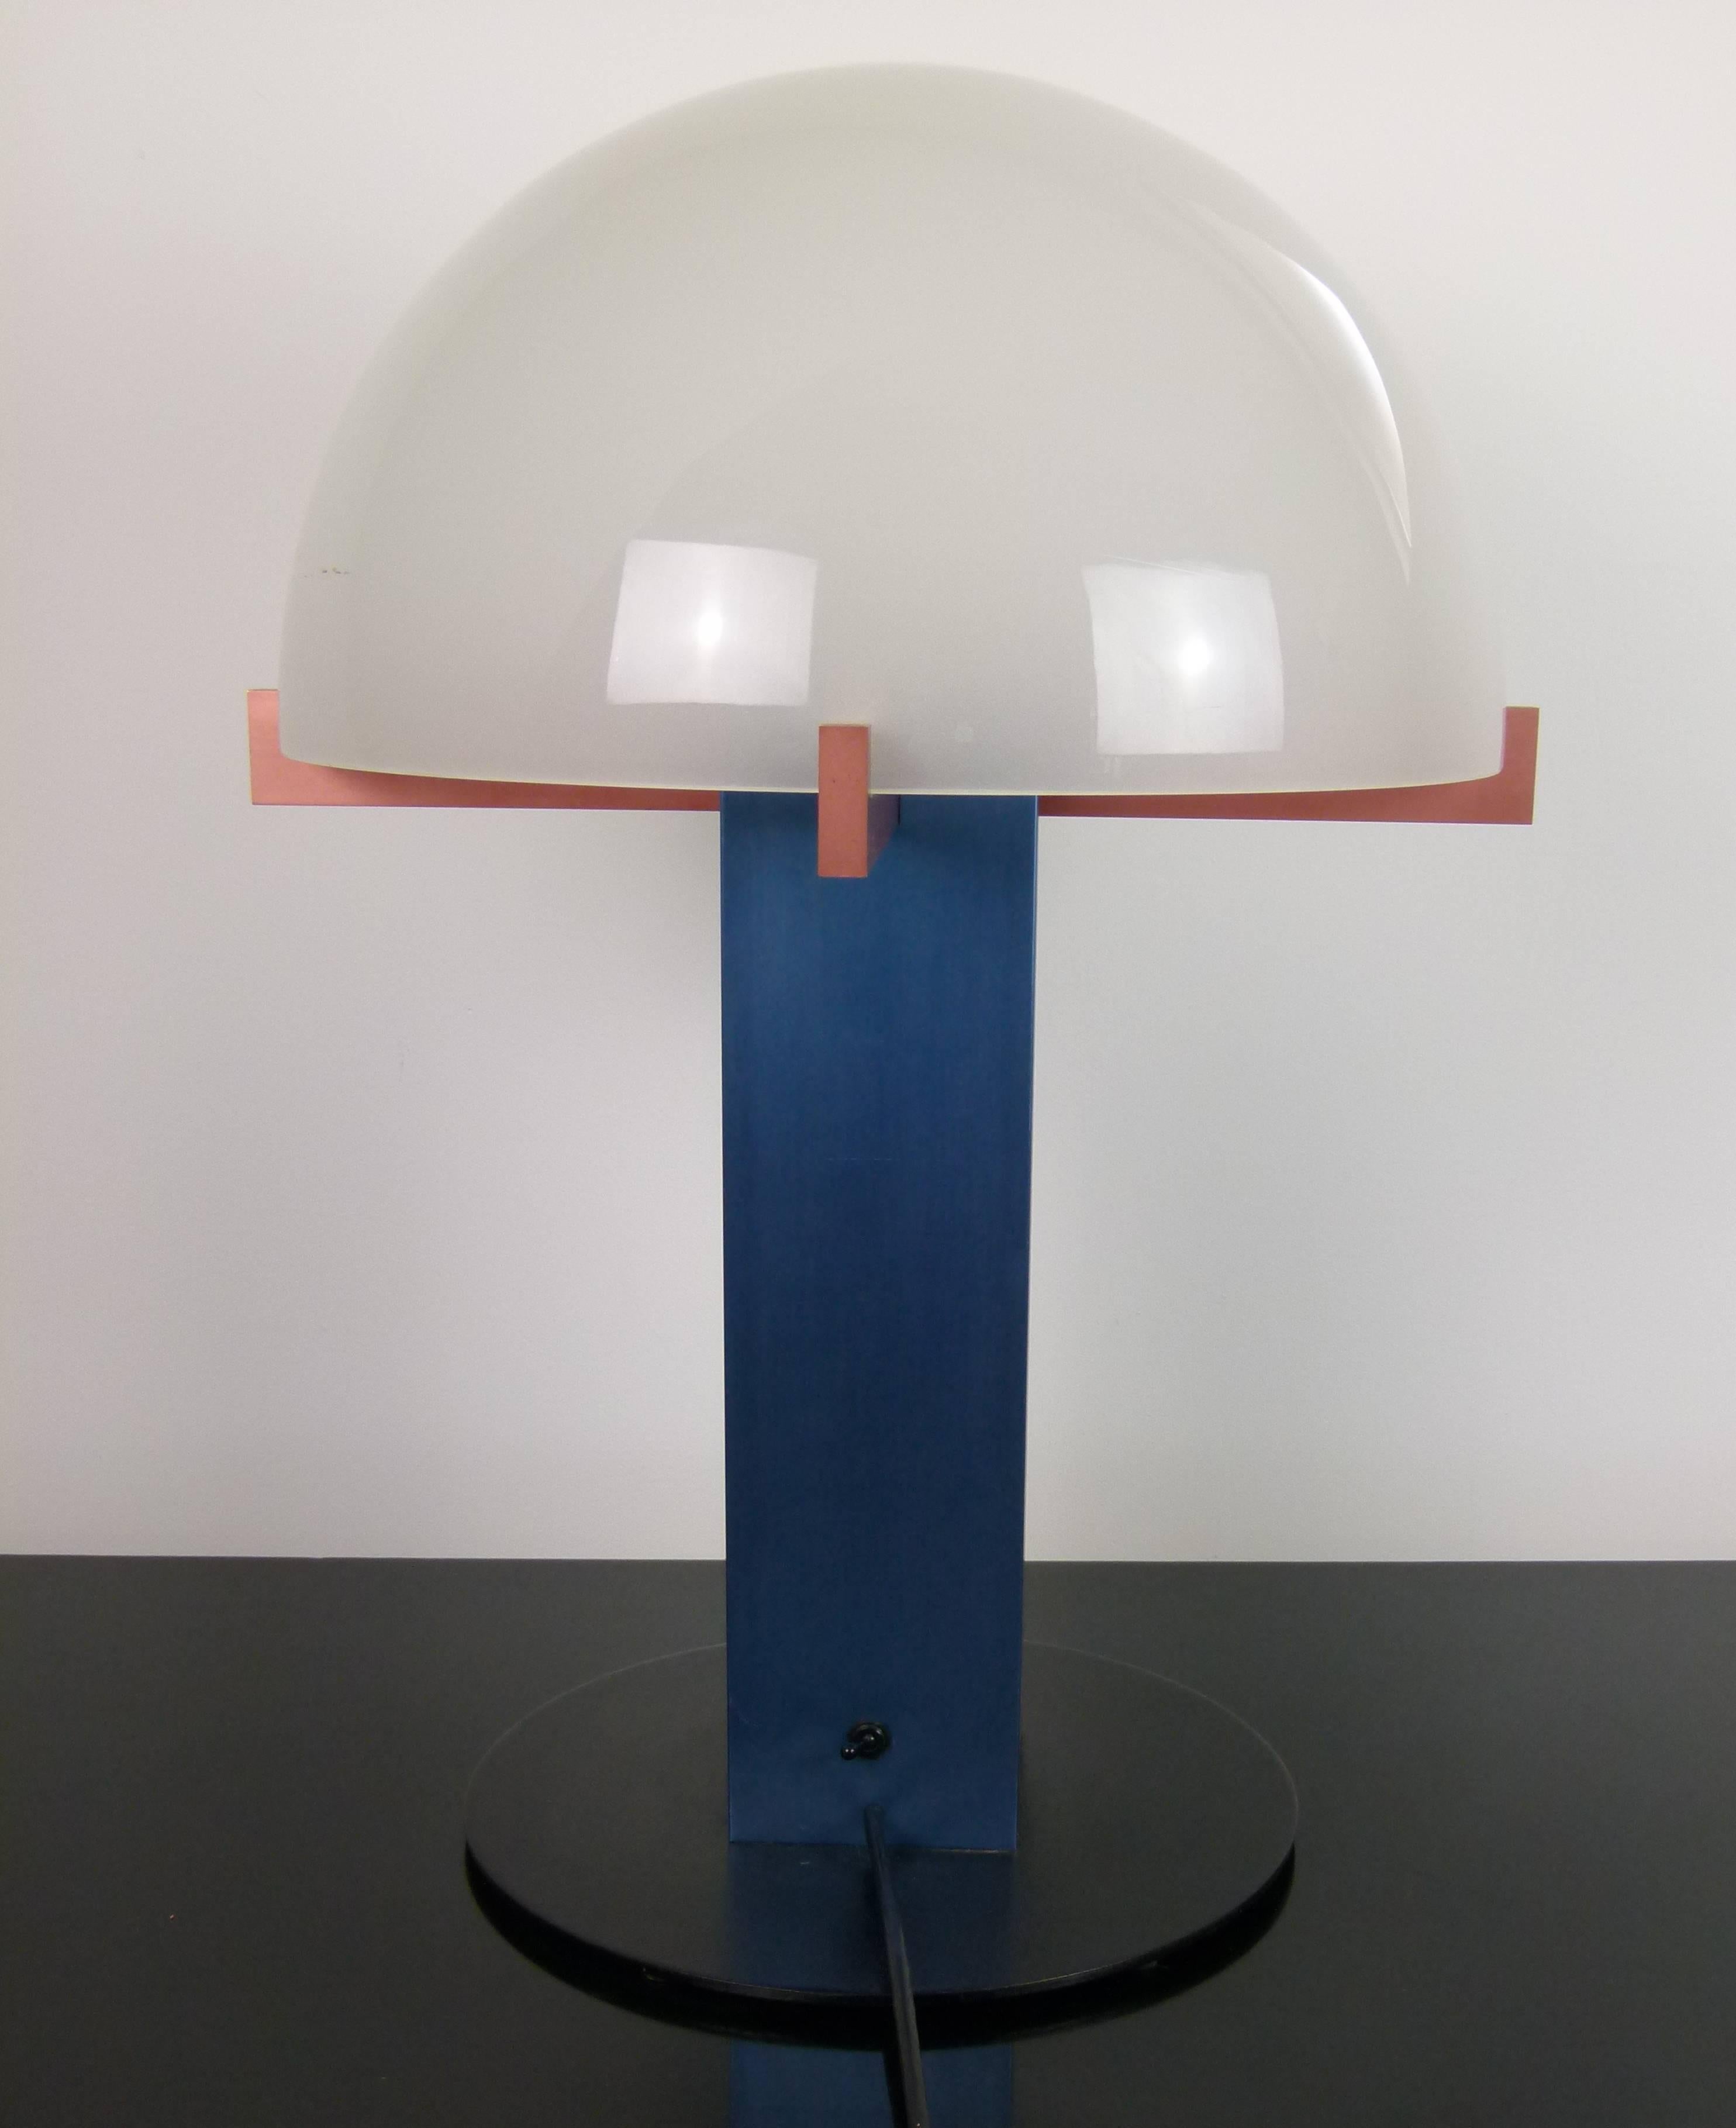 Black lacquered metal and colored brushed aluminium consisting of a black lacquered metal circular foot surmounted by a rectangular trunk in blue color brushed aluminum.
A red color brushed aluminum cross arm is set on the trunk.
A dome-shaped